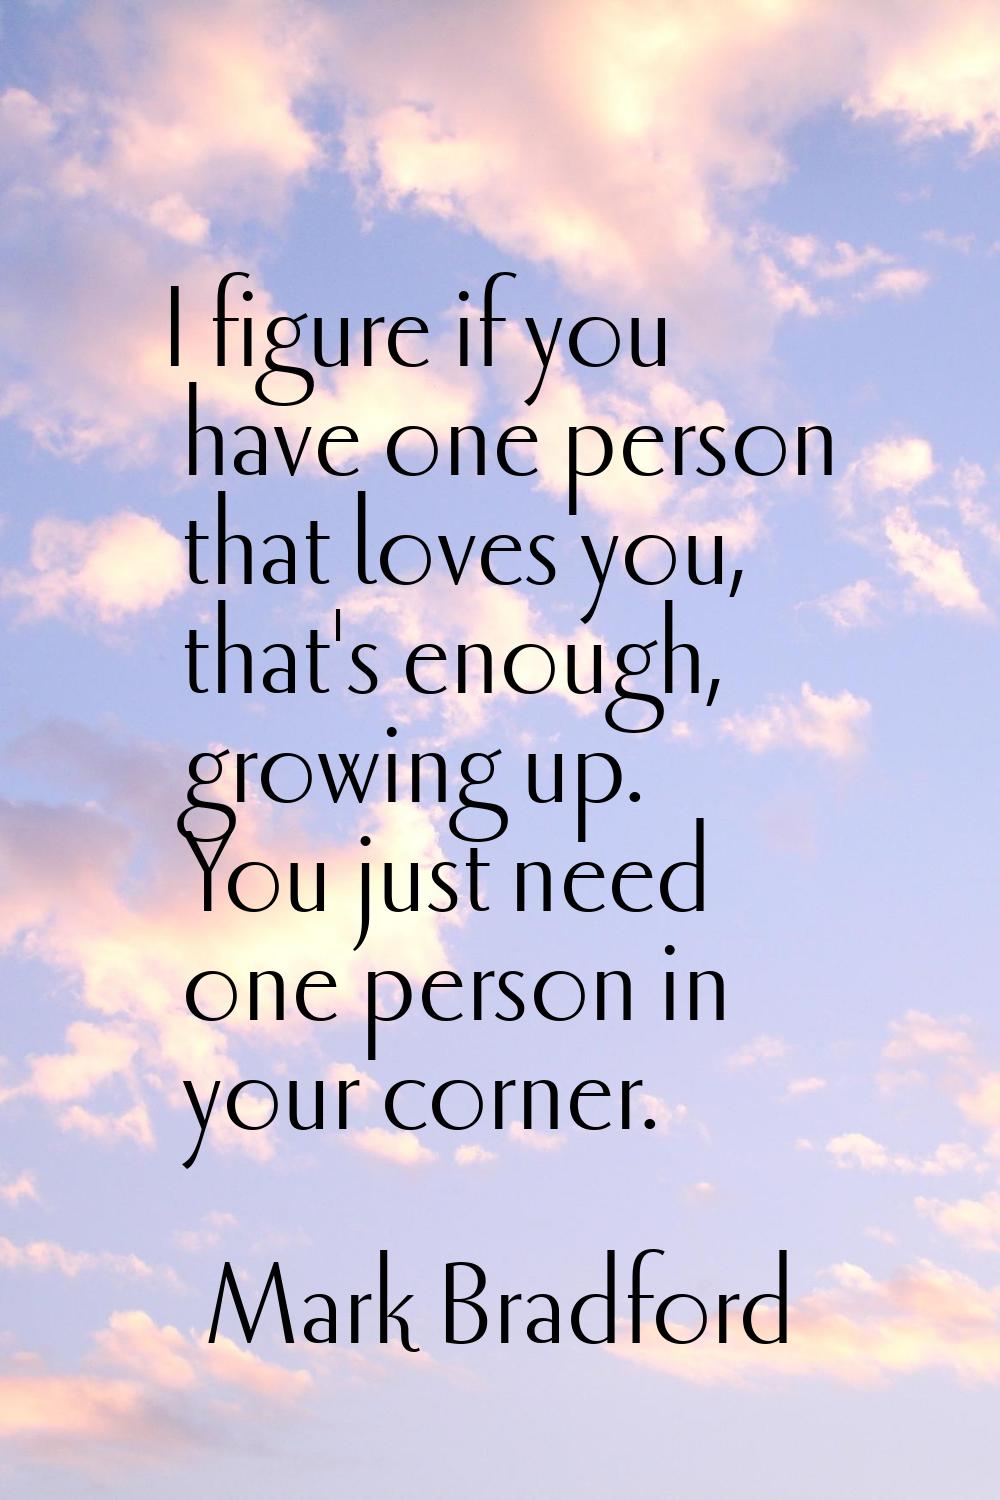 I figure if you have one person that loves you, that's enough, growing up. You just need one person